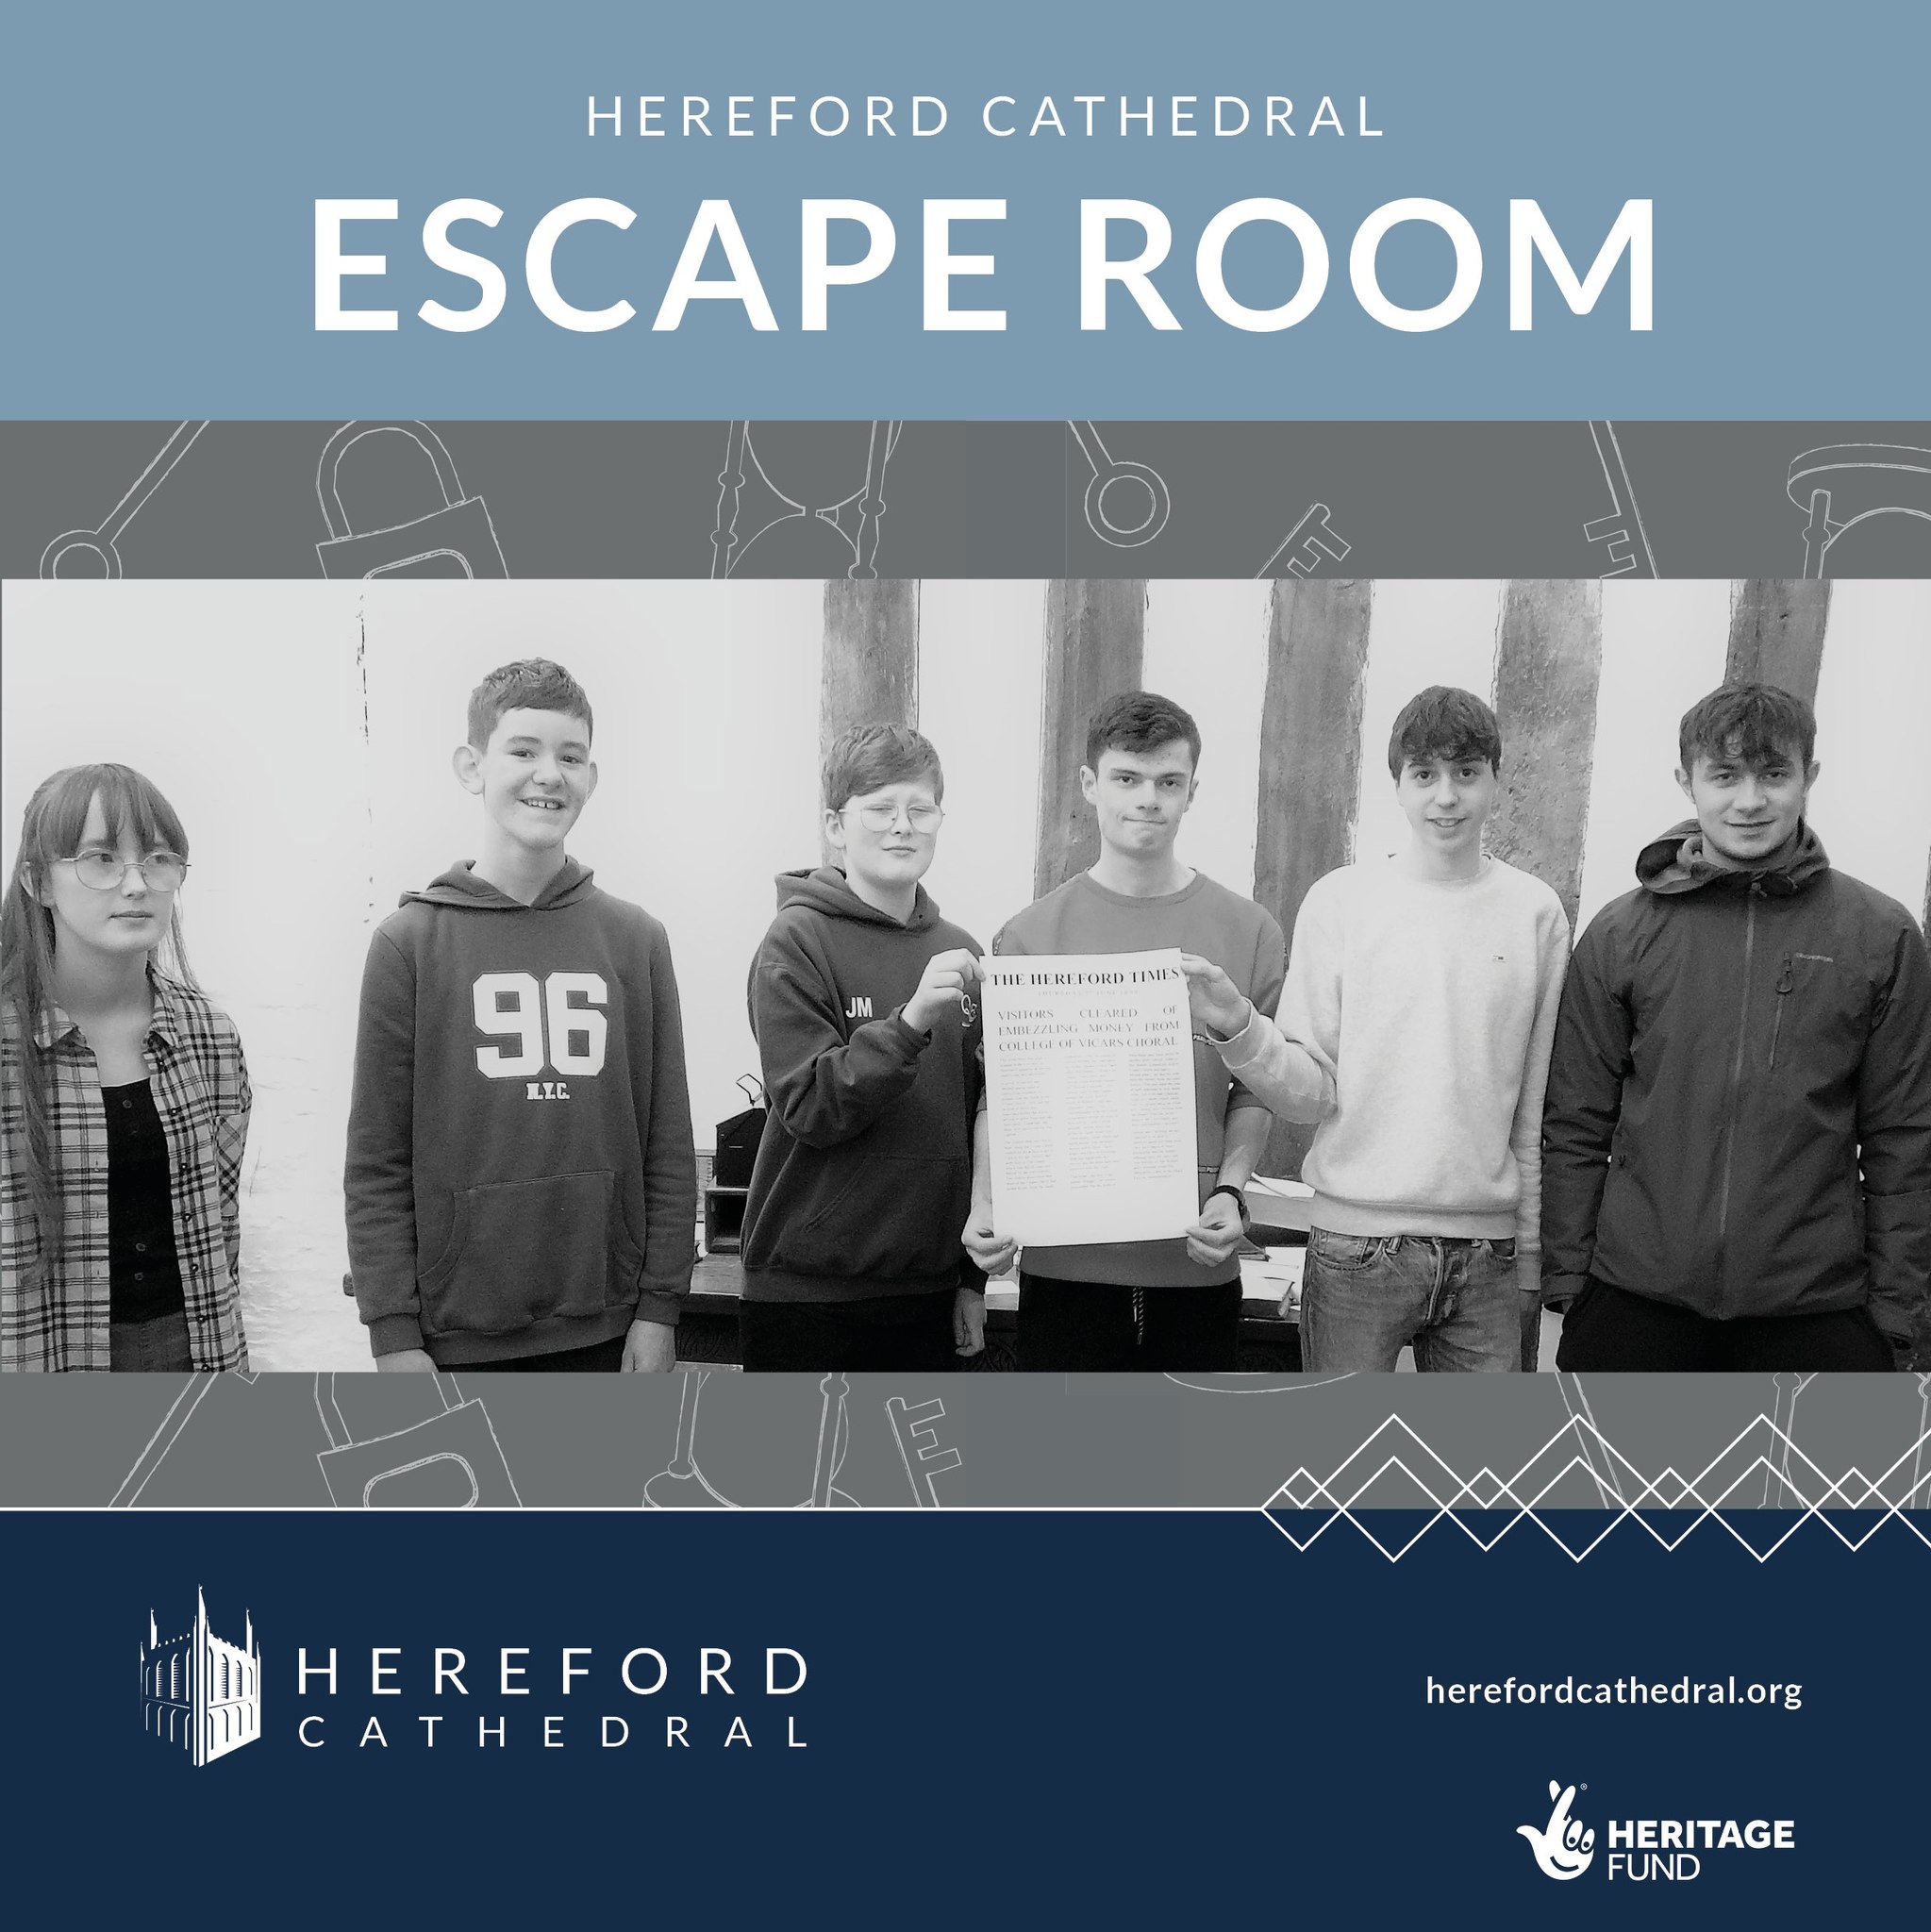 FEATURED | Excitement as Escape Room launched at Hereford Cathedral thanks to National Lottery funding – BOOK NOW